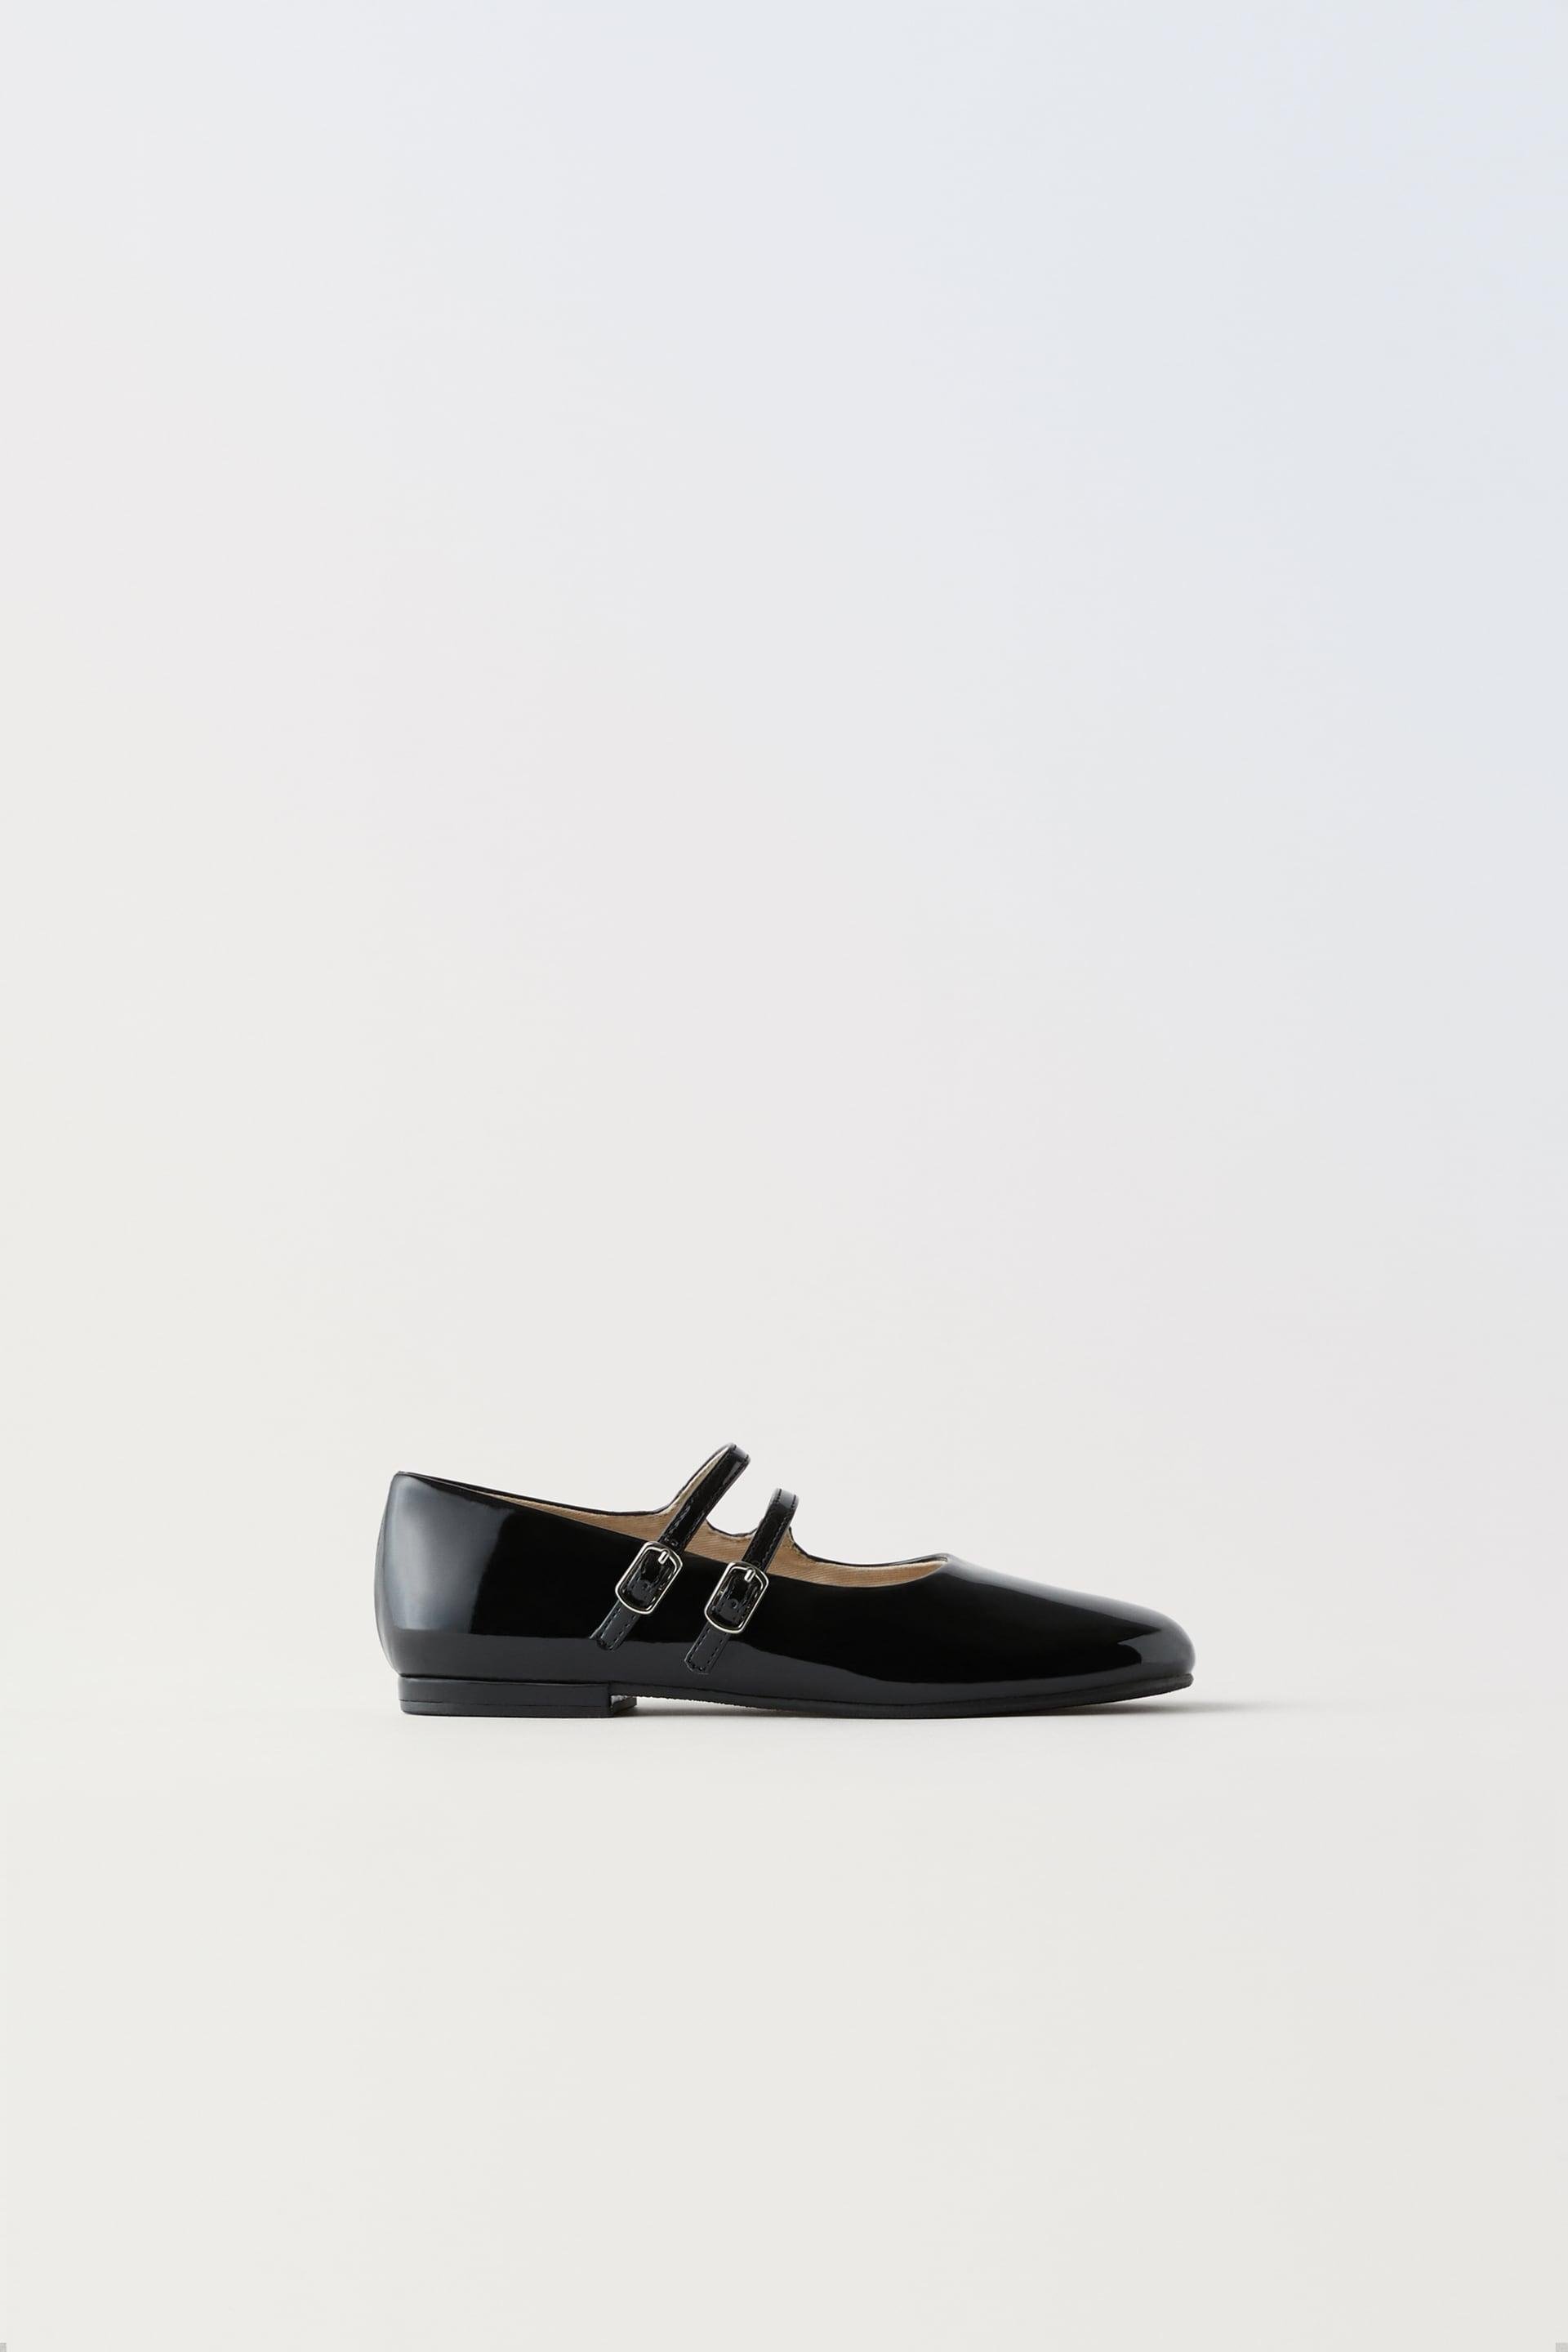 FAUX PATENT LEATHER BALLET FLATS by ZARA